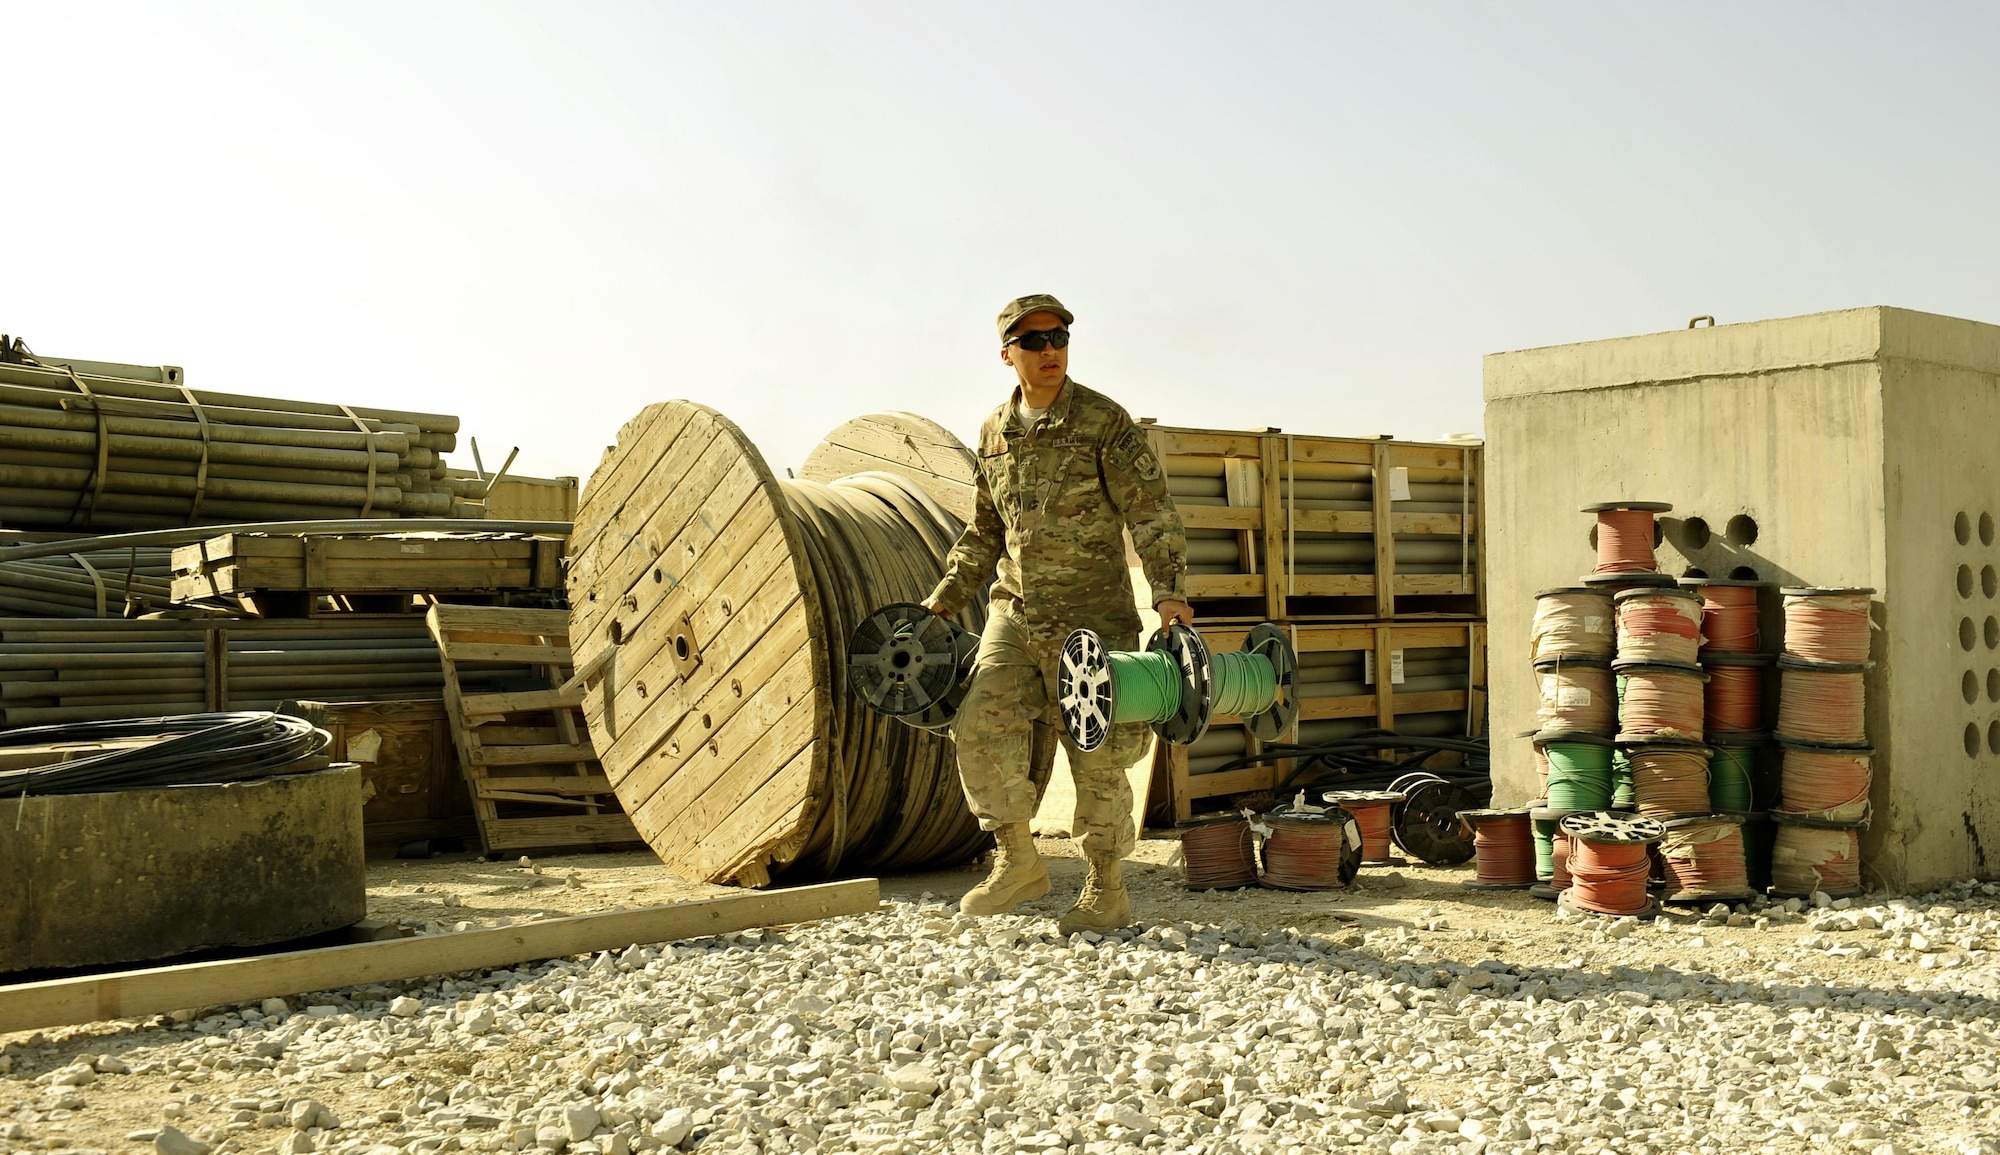 Senior Airman Randel Gutierrez, 455th Expeditionary Communications Squadron member, picks up copper cables from the storage yard on Bagram Airfield, Afghanistan. Gutierrez is deployed from Hill Air Force Base, Utah.